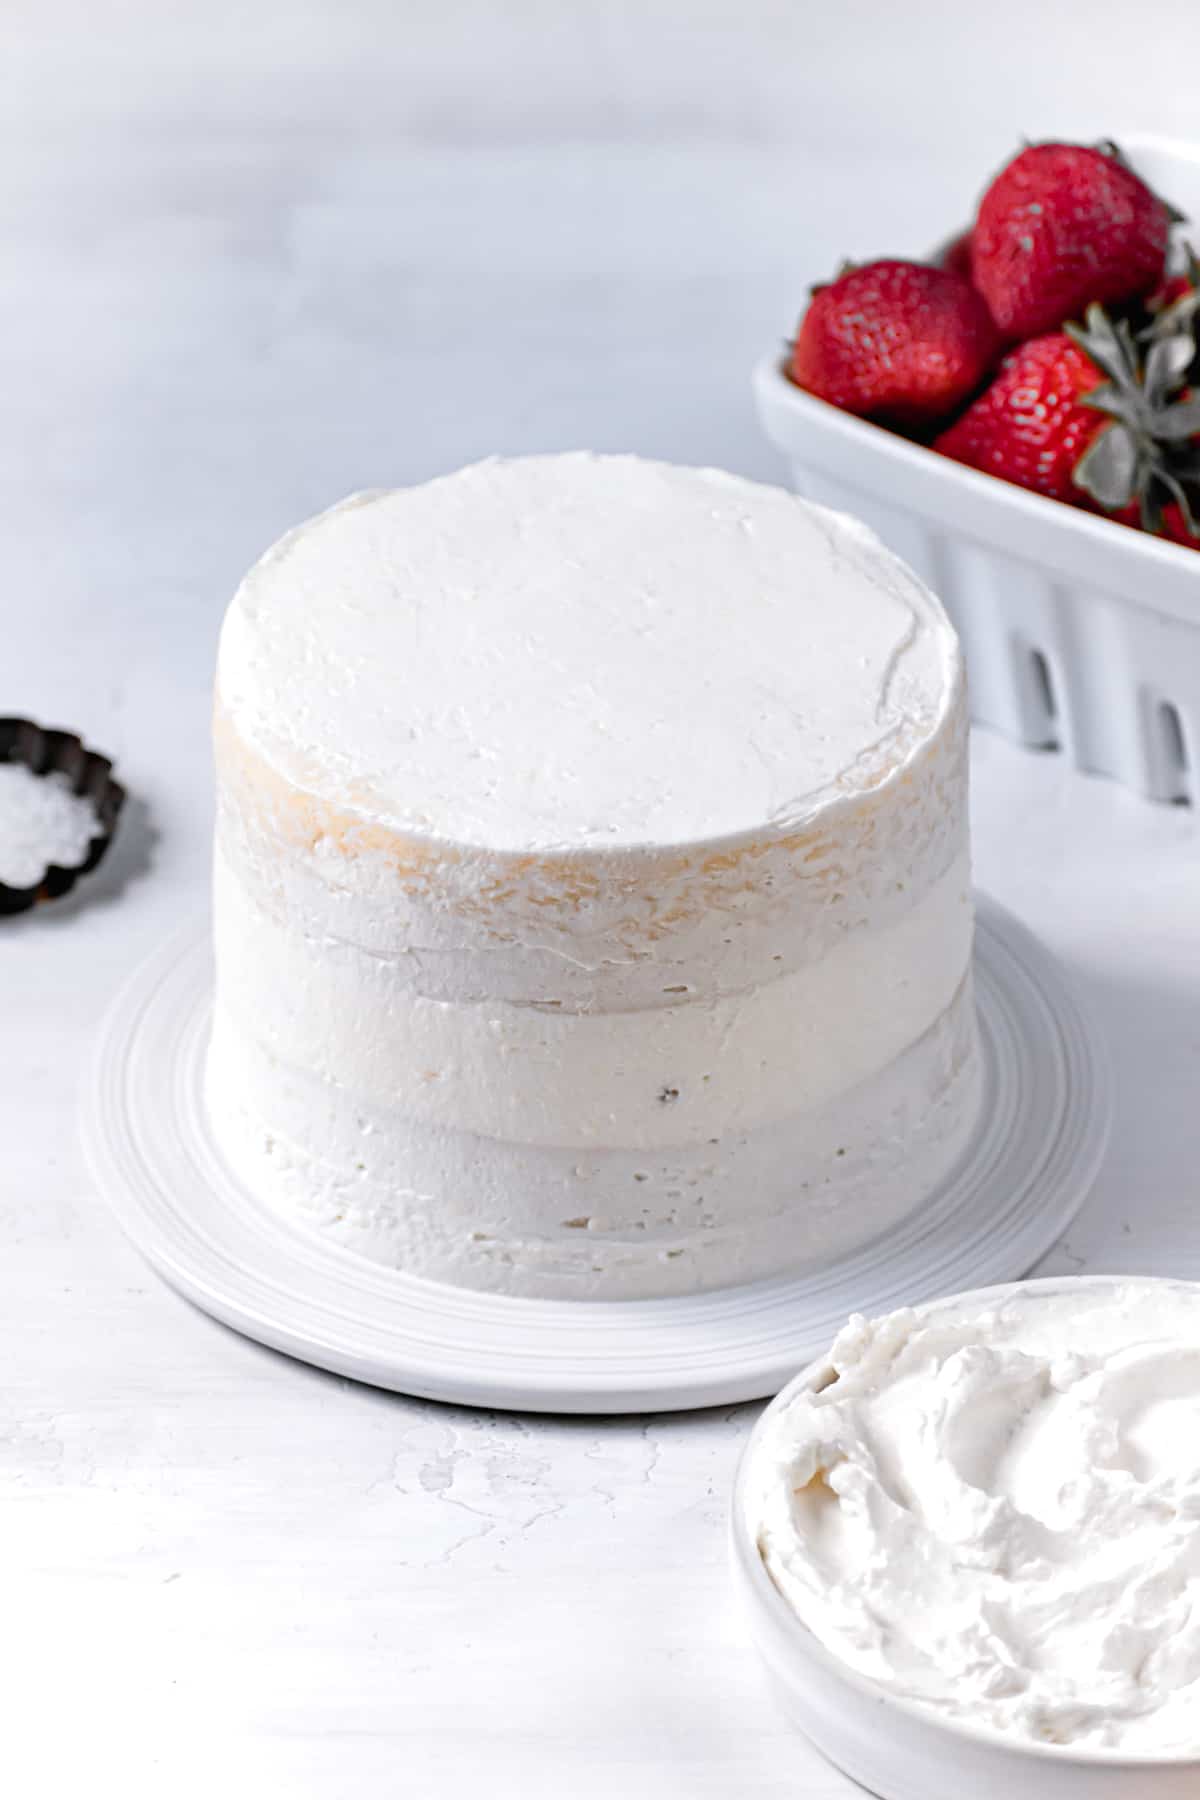 crumb coat of frosting spread all over cake.